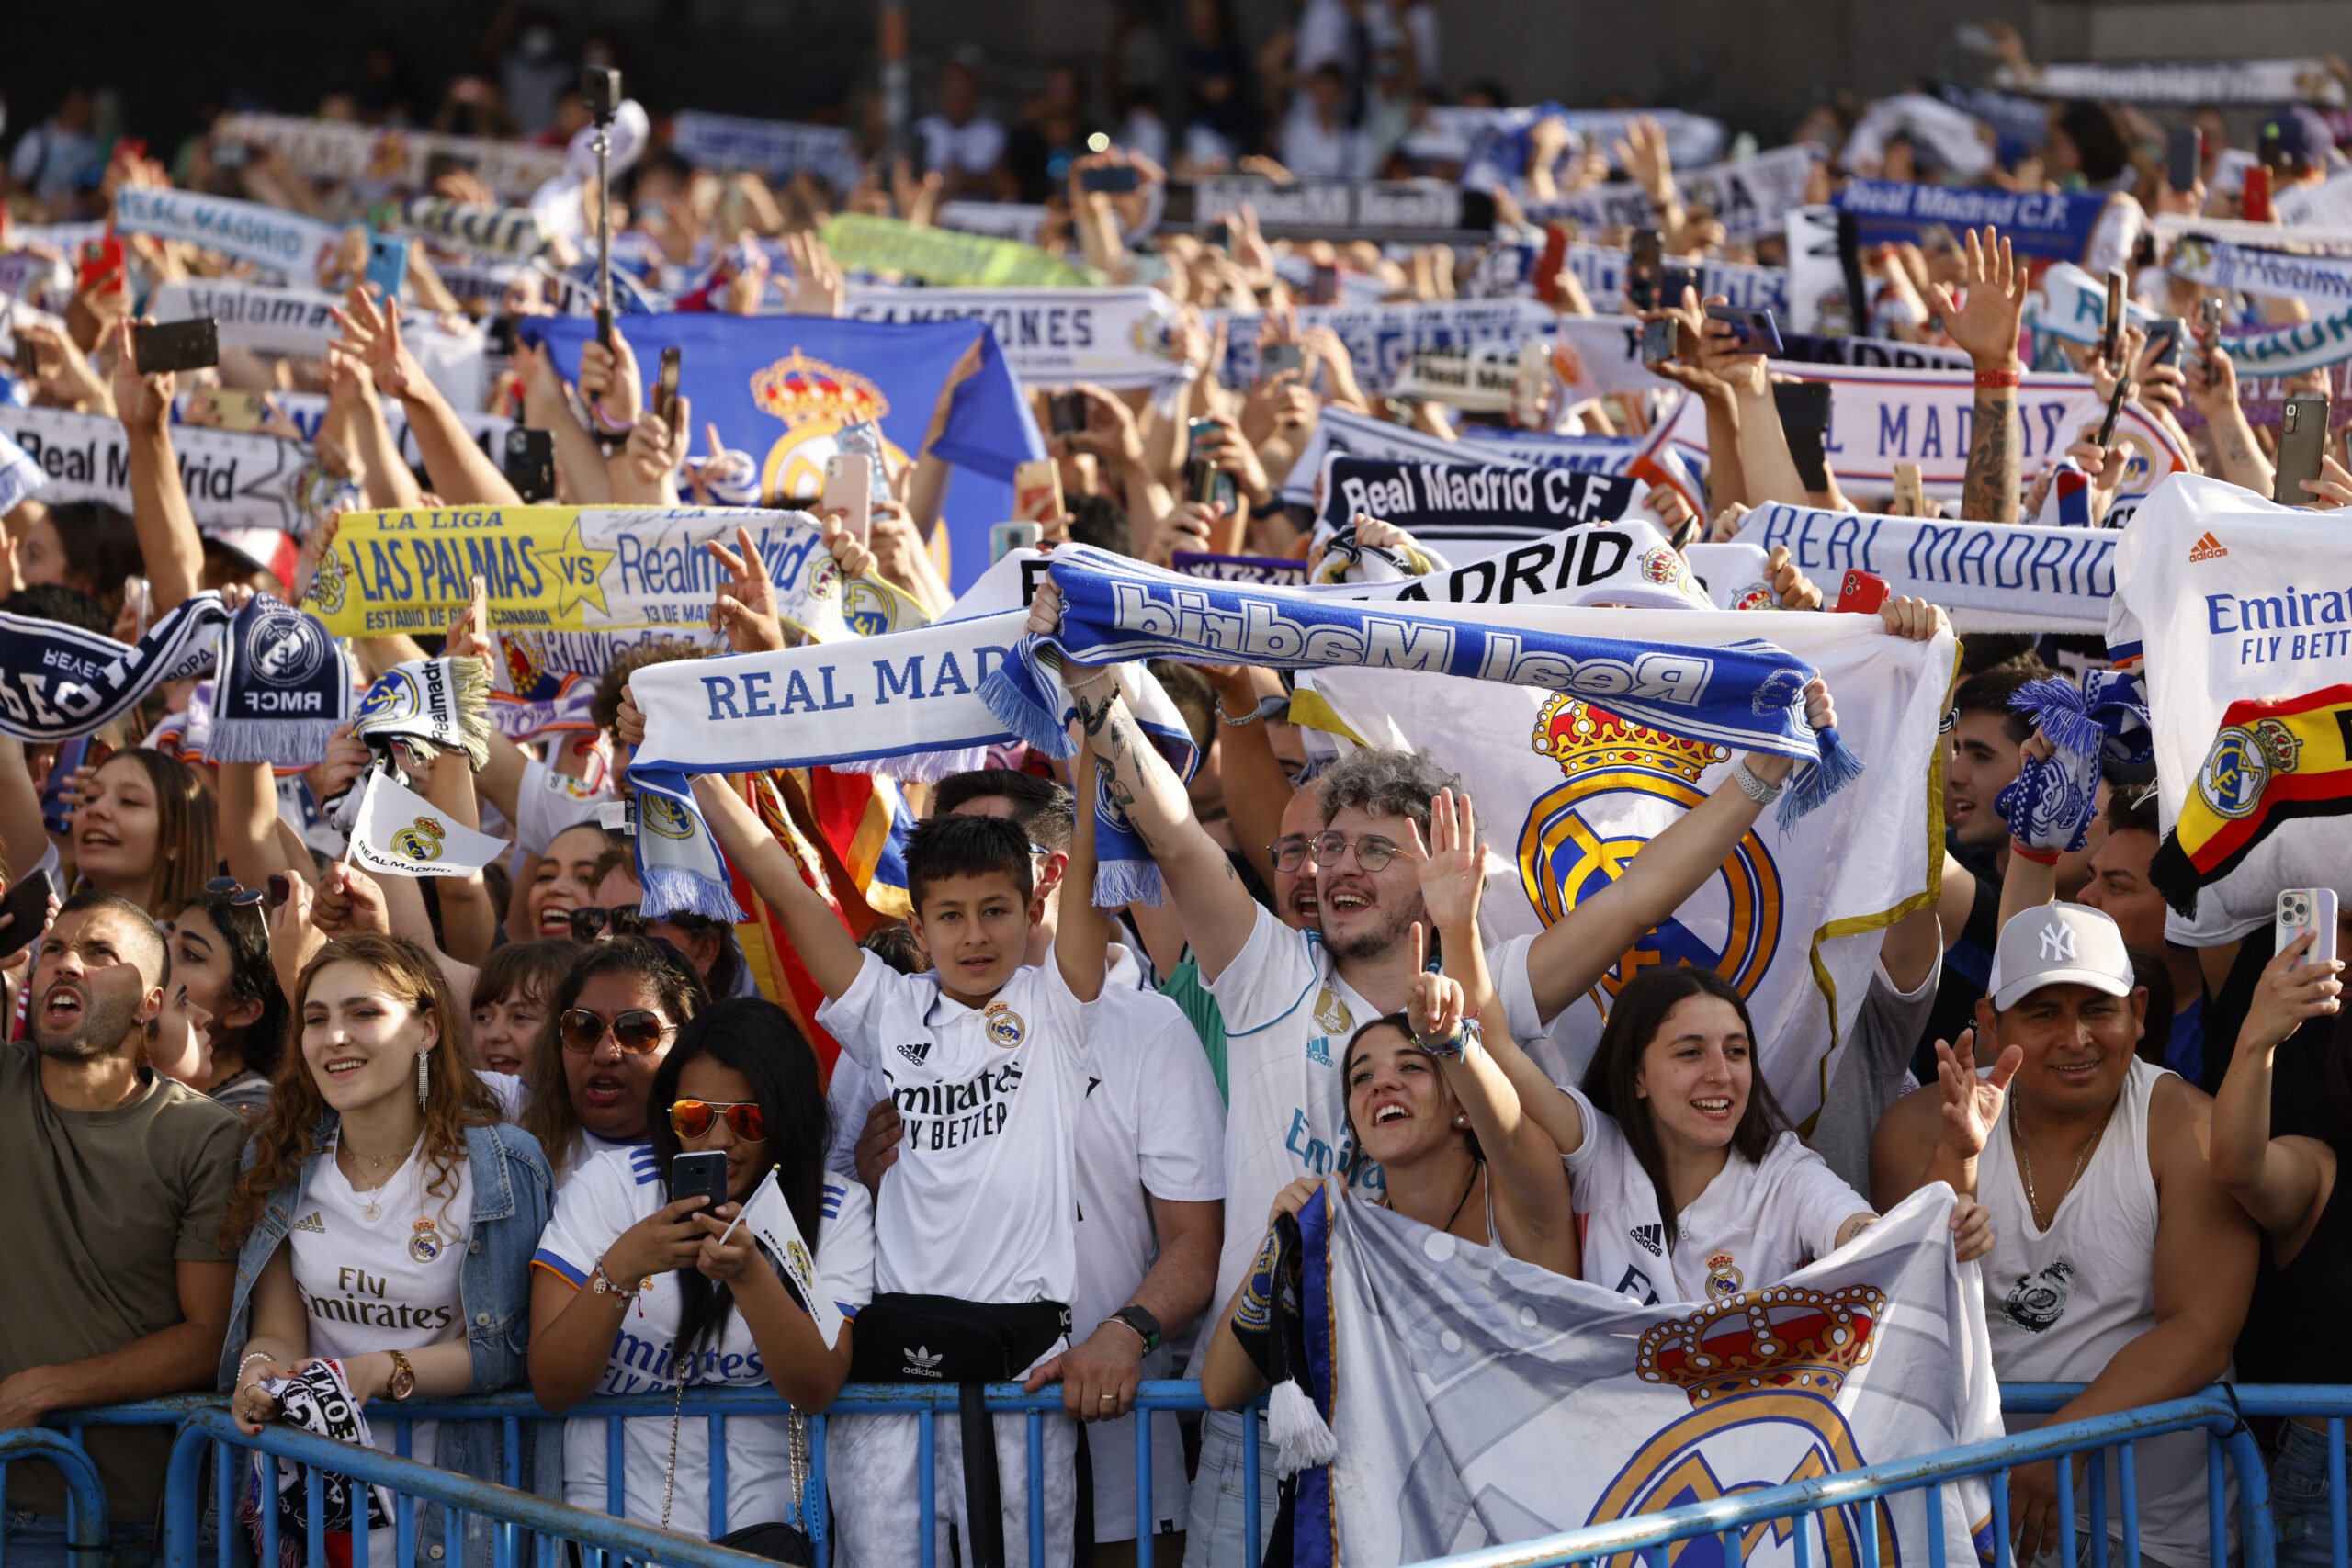 UEFA’s Snub Leaves Real Madrid Supporters Angry